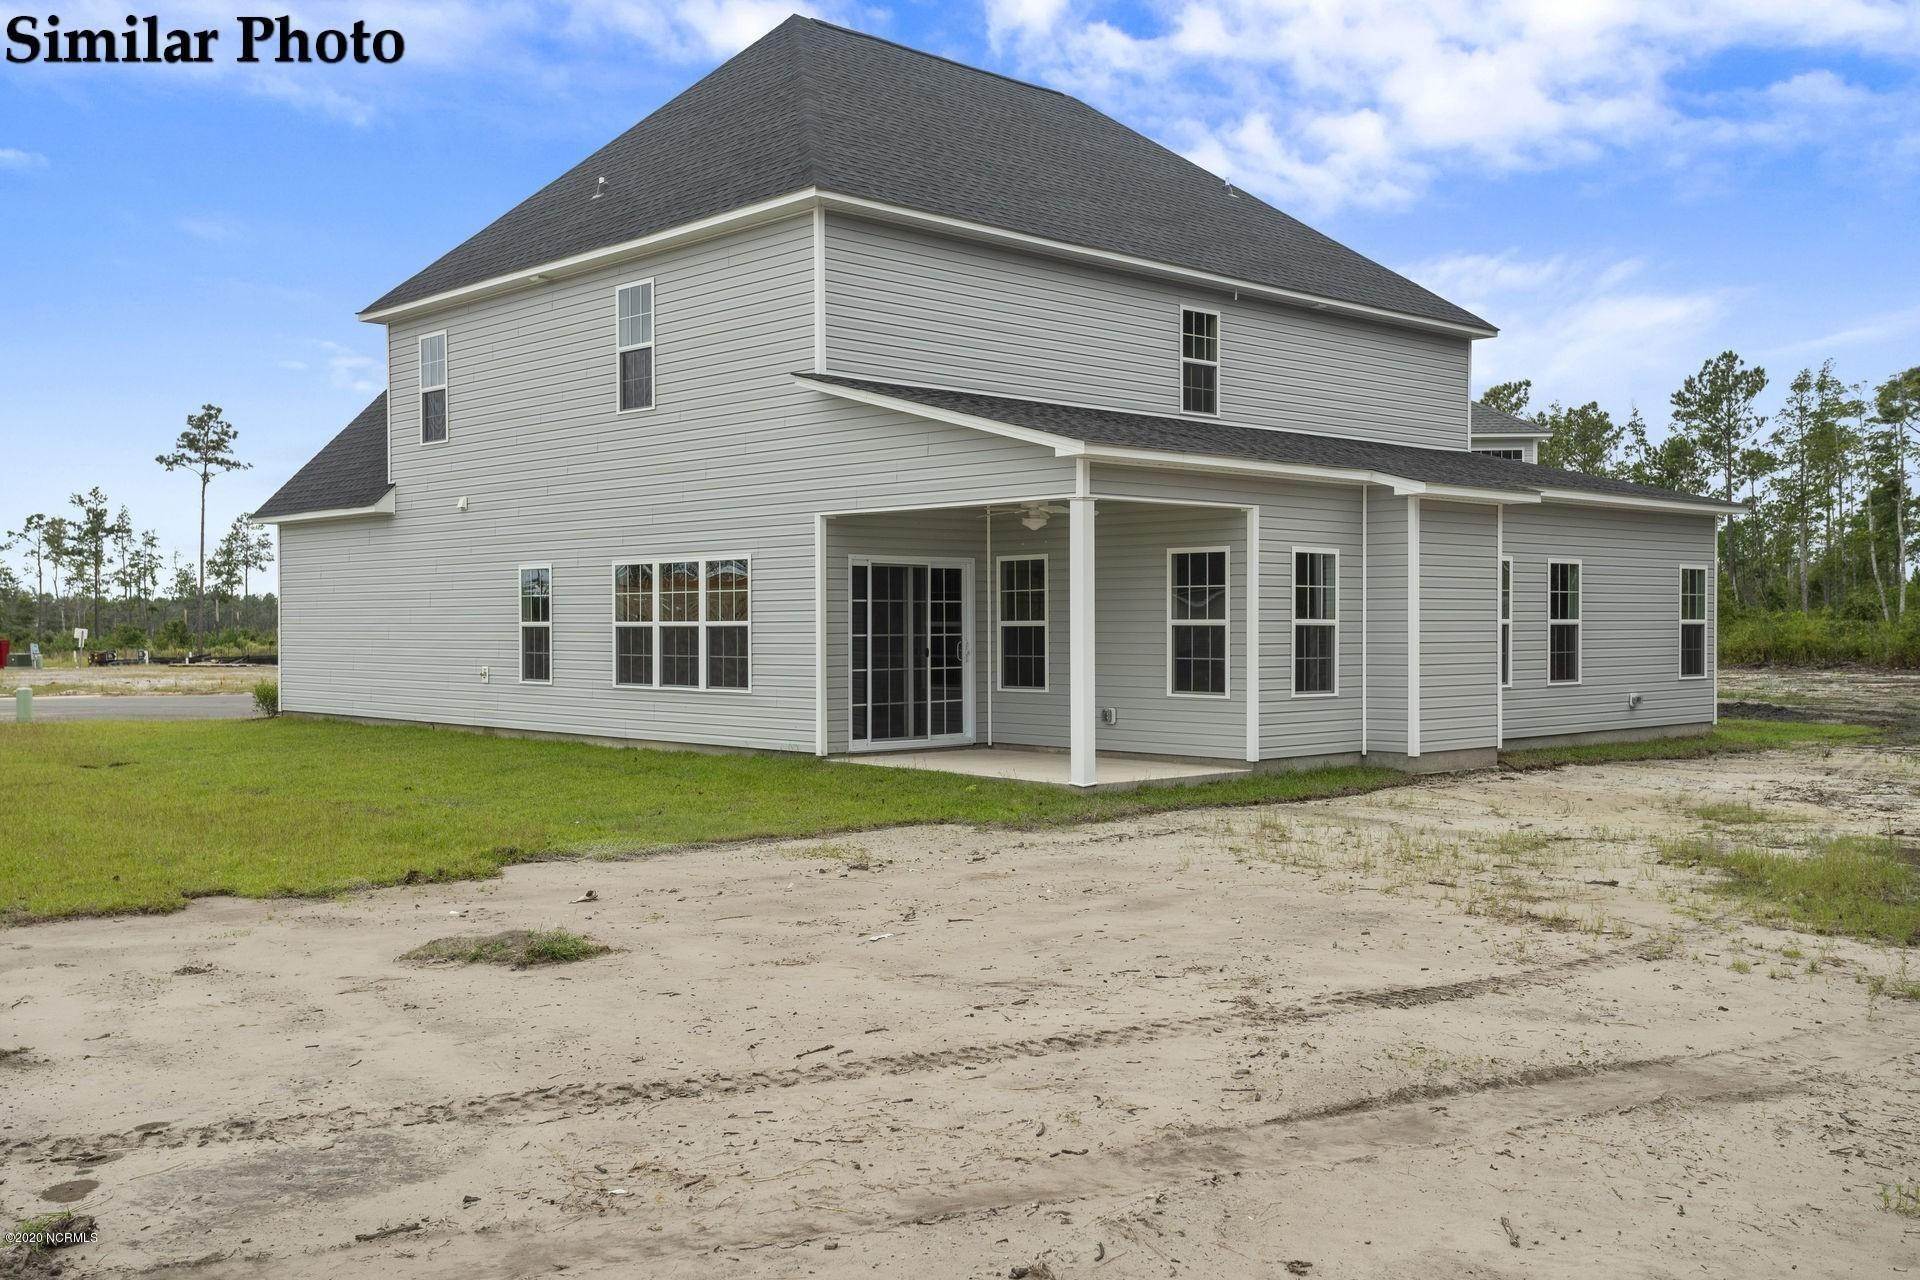 45. Single Family for Sale at Rocky Point, NC 28457